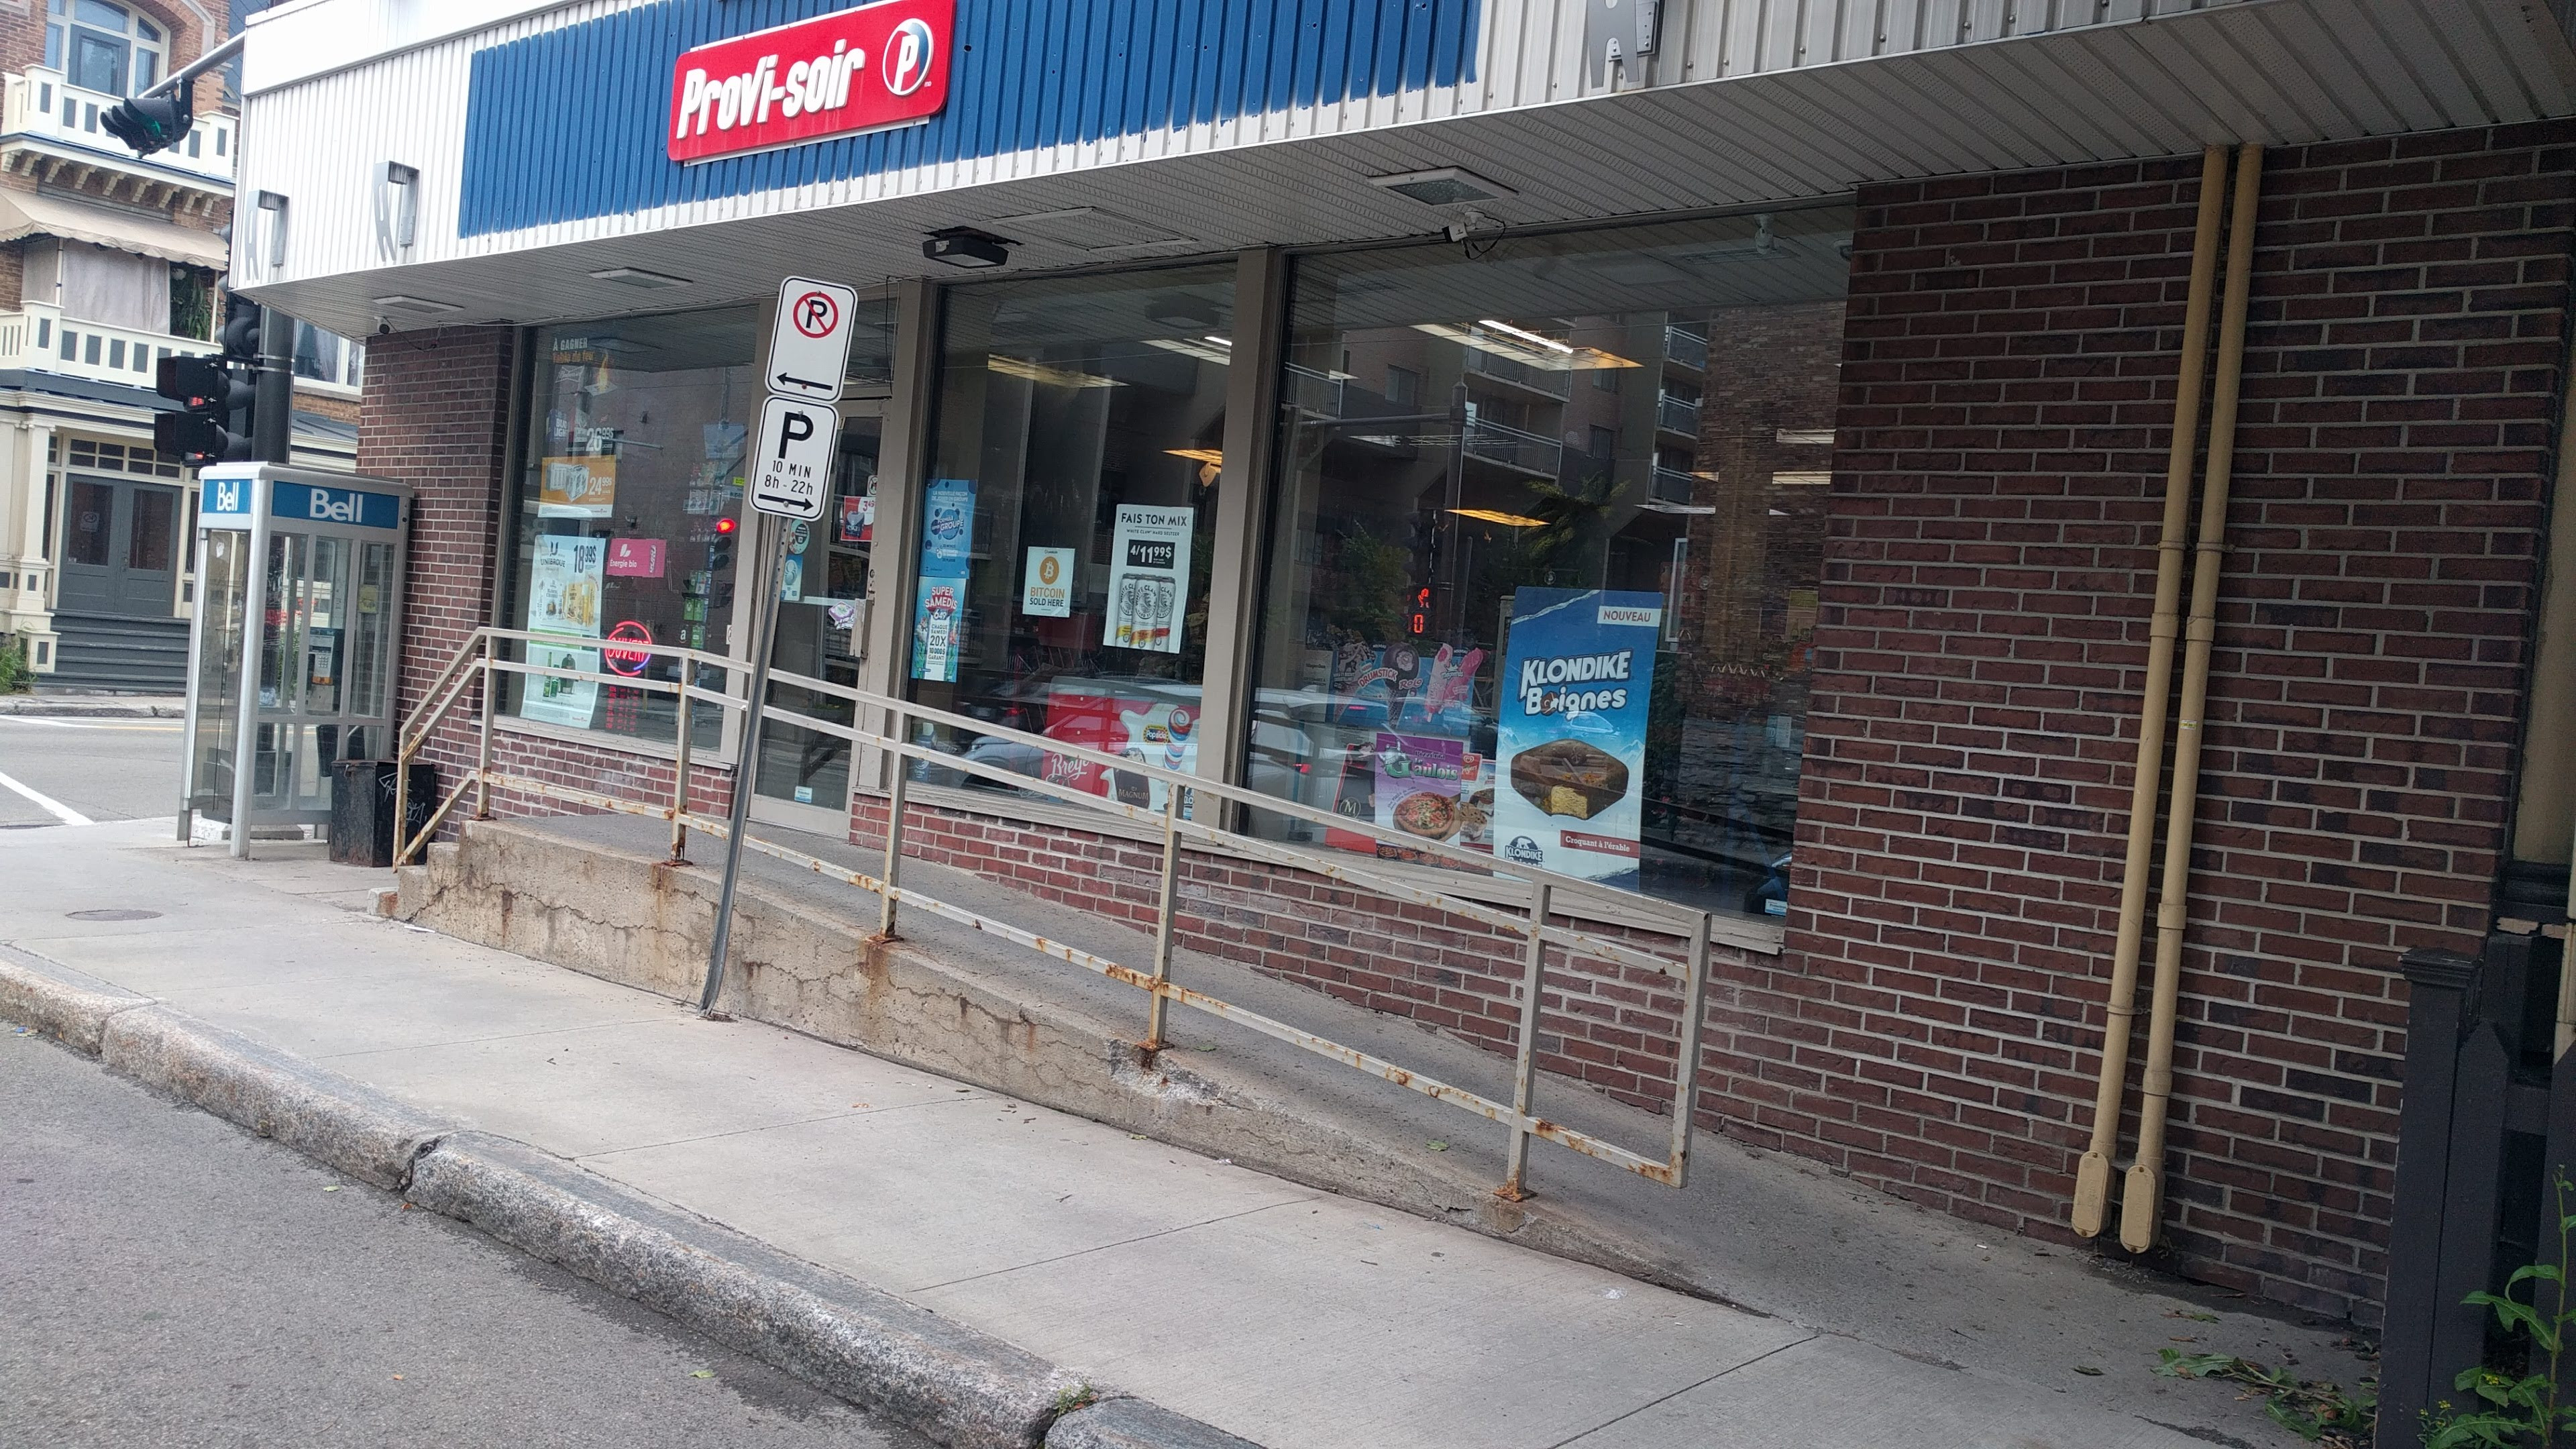 Tough choice - how to choose between Bell's public telephone and this major Quebec convenience store chain's crhypeto offer right next to it?